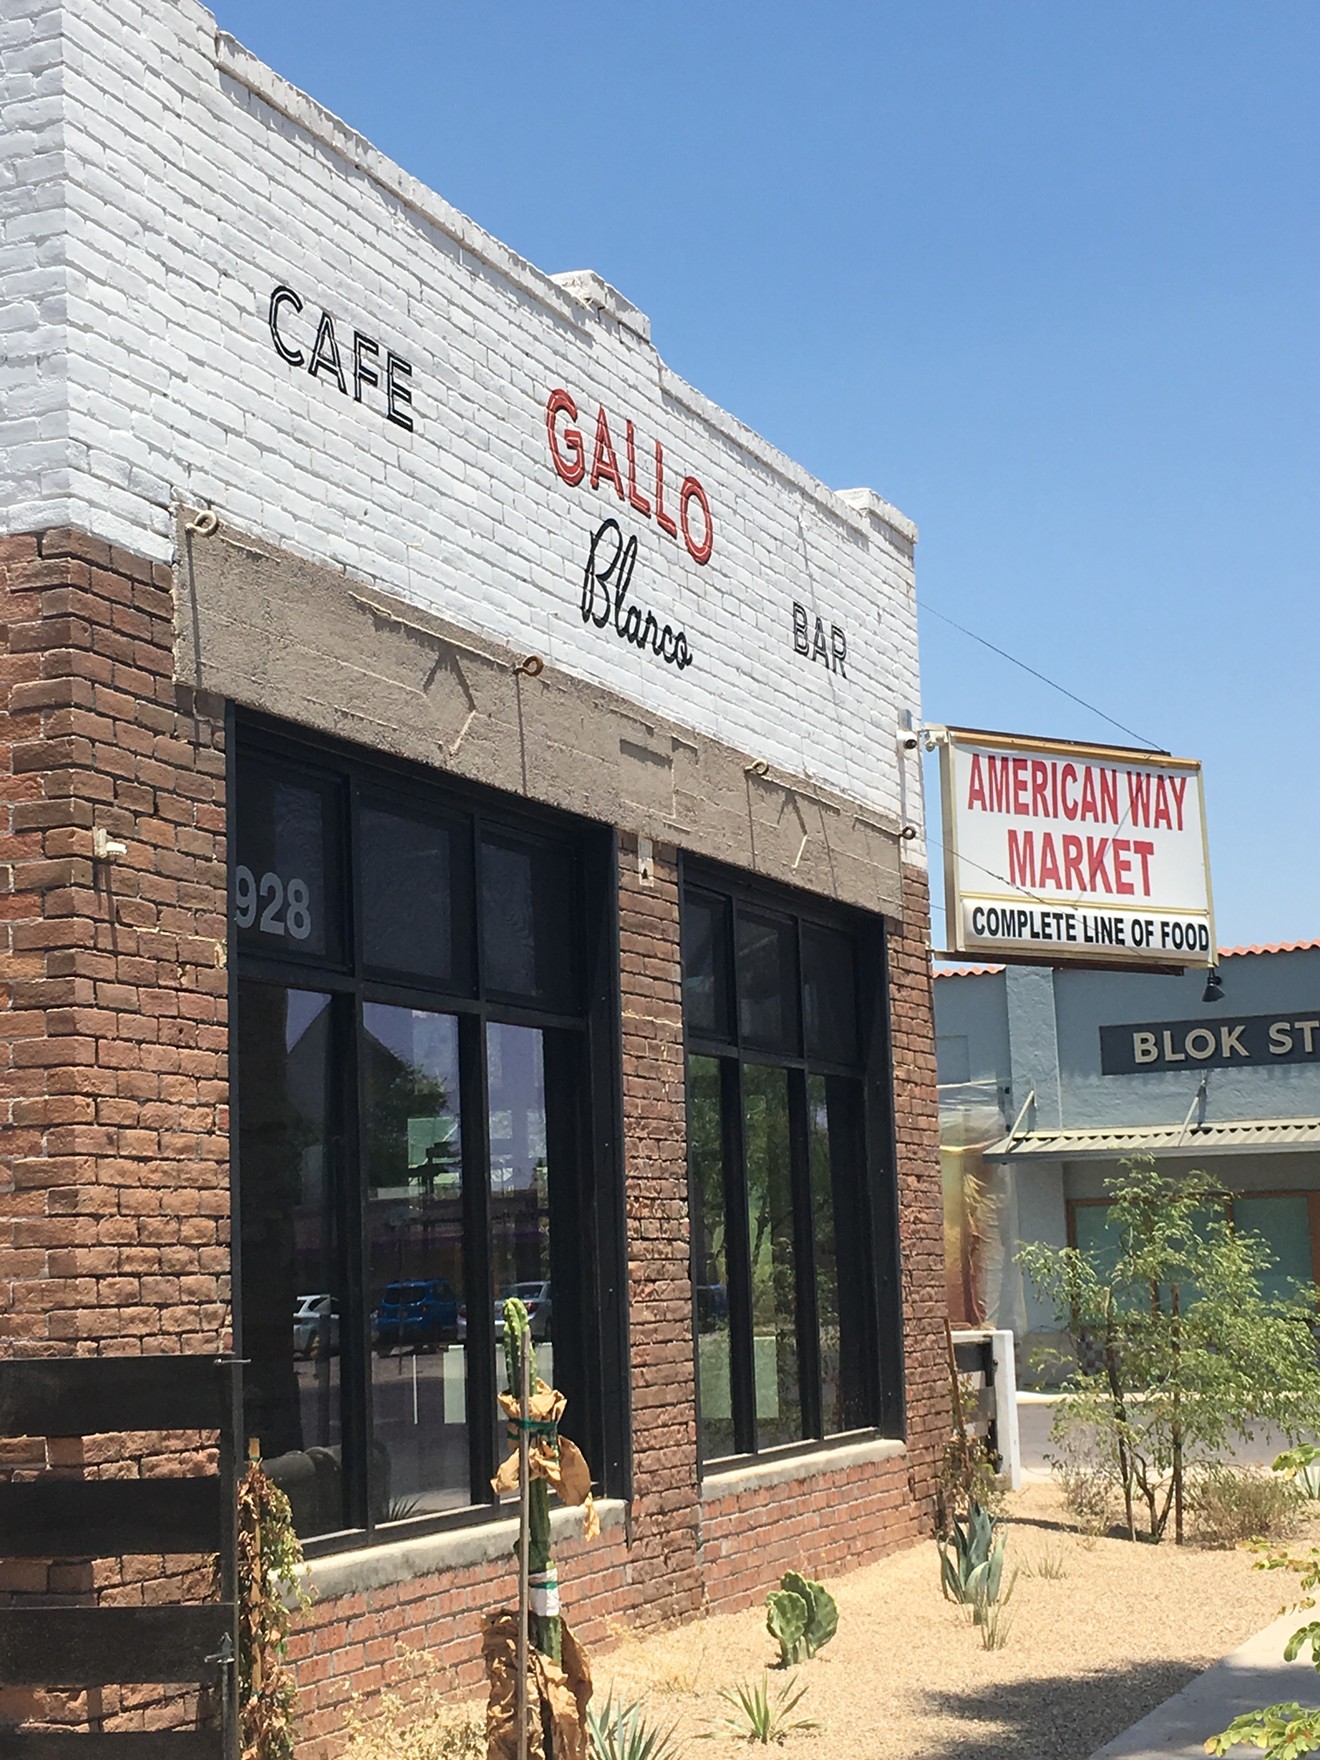 Gallo Blanco Cafe & Bar will open in the Garfield neighborhood of Central Phoenix on Saturday, July 1.